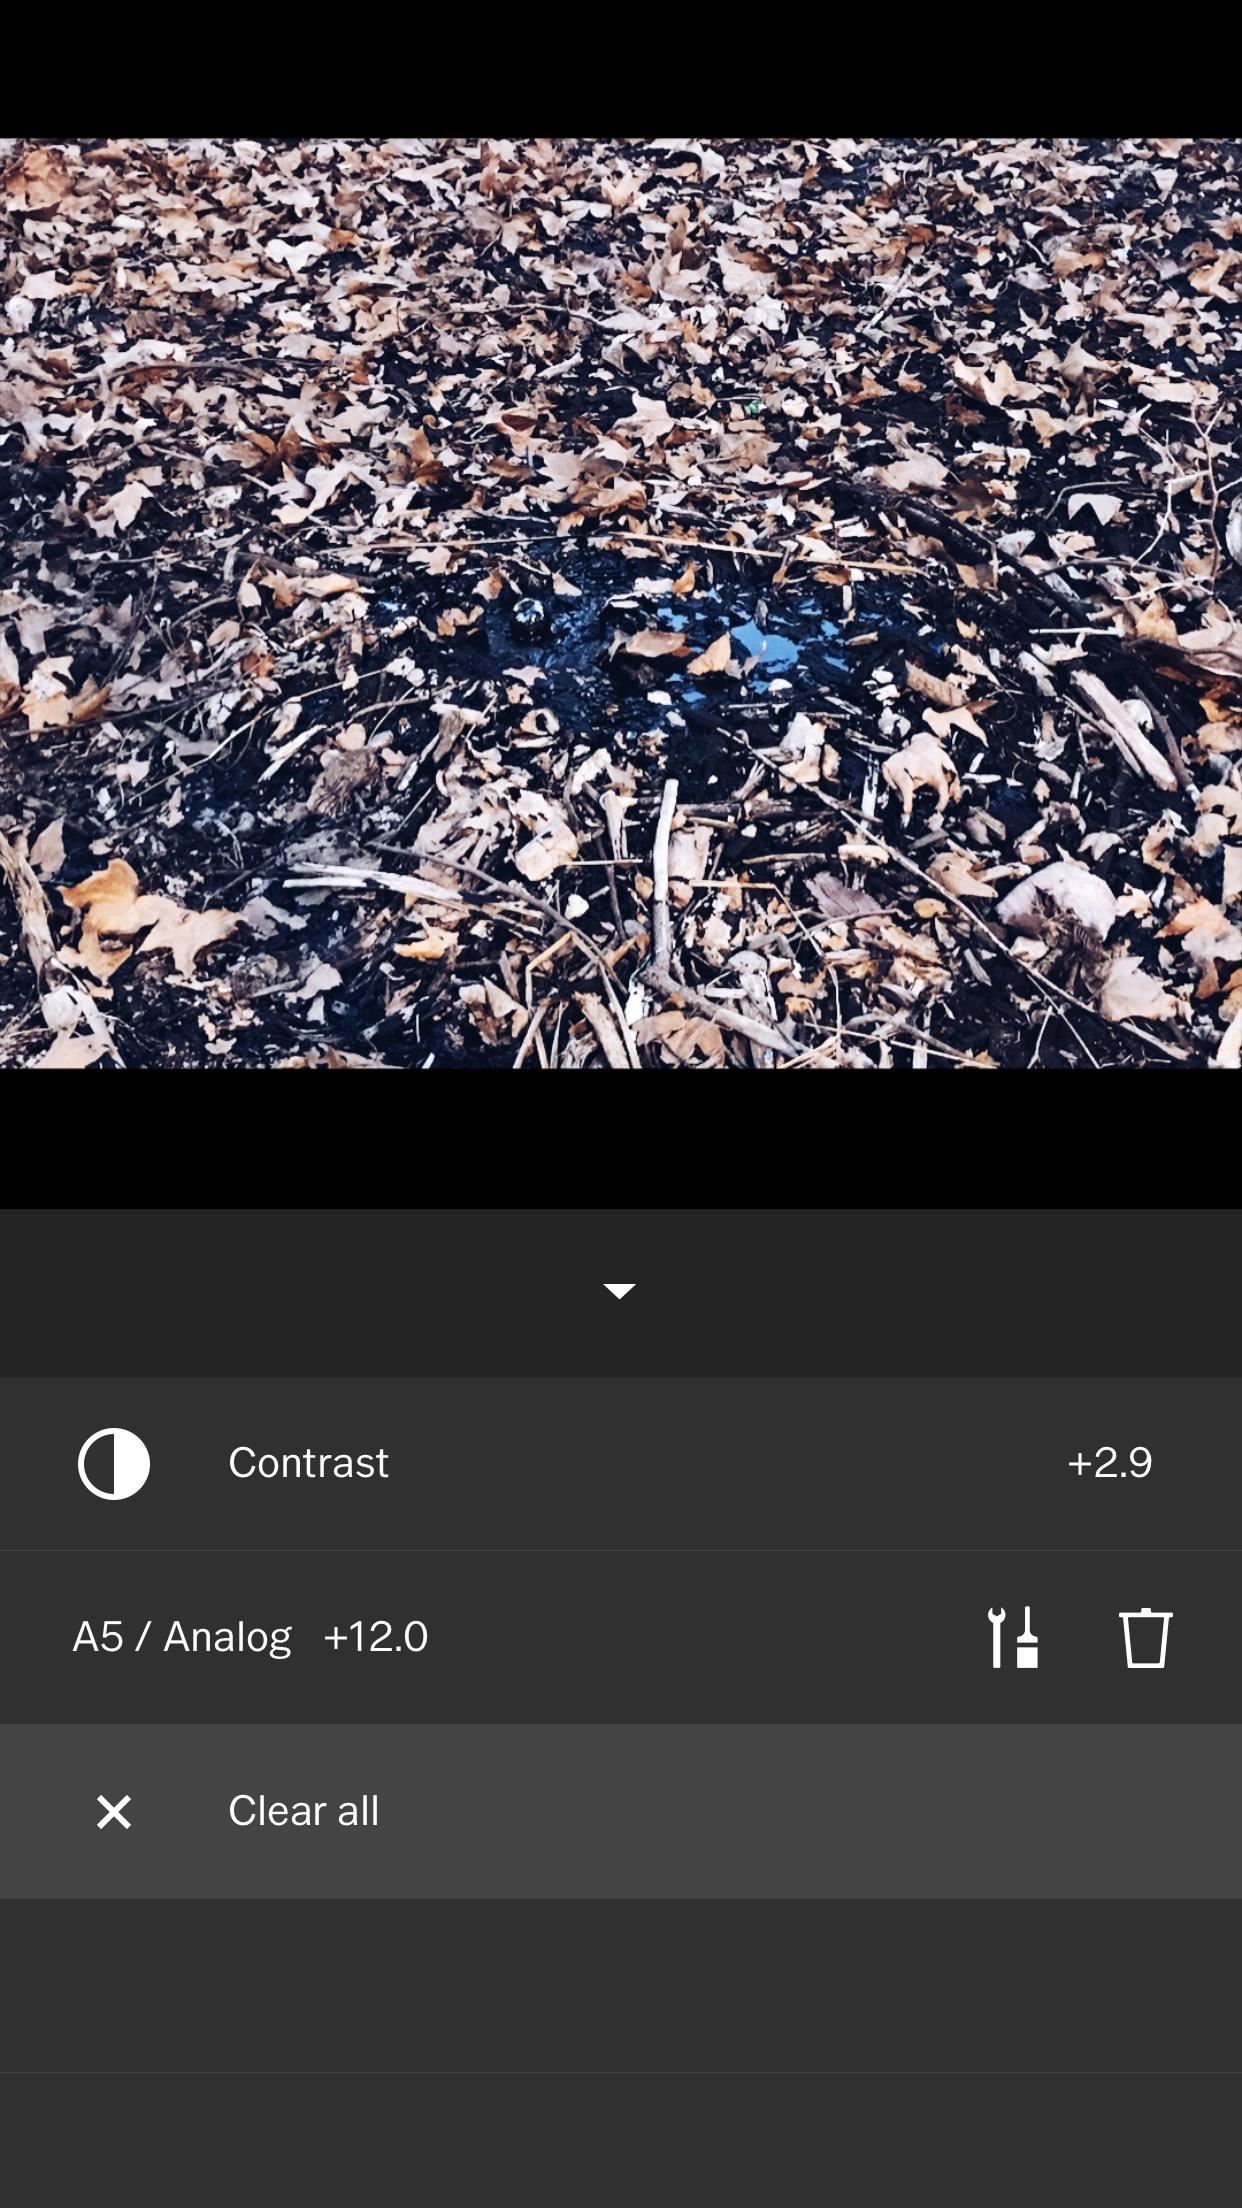 VSCO 101: How to Use Presets (or Filters) on Your Photos